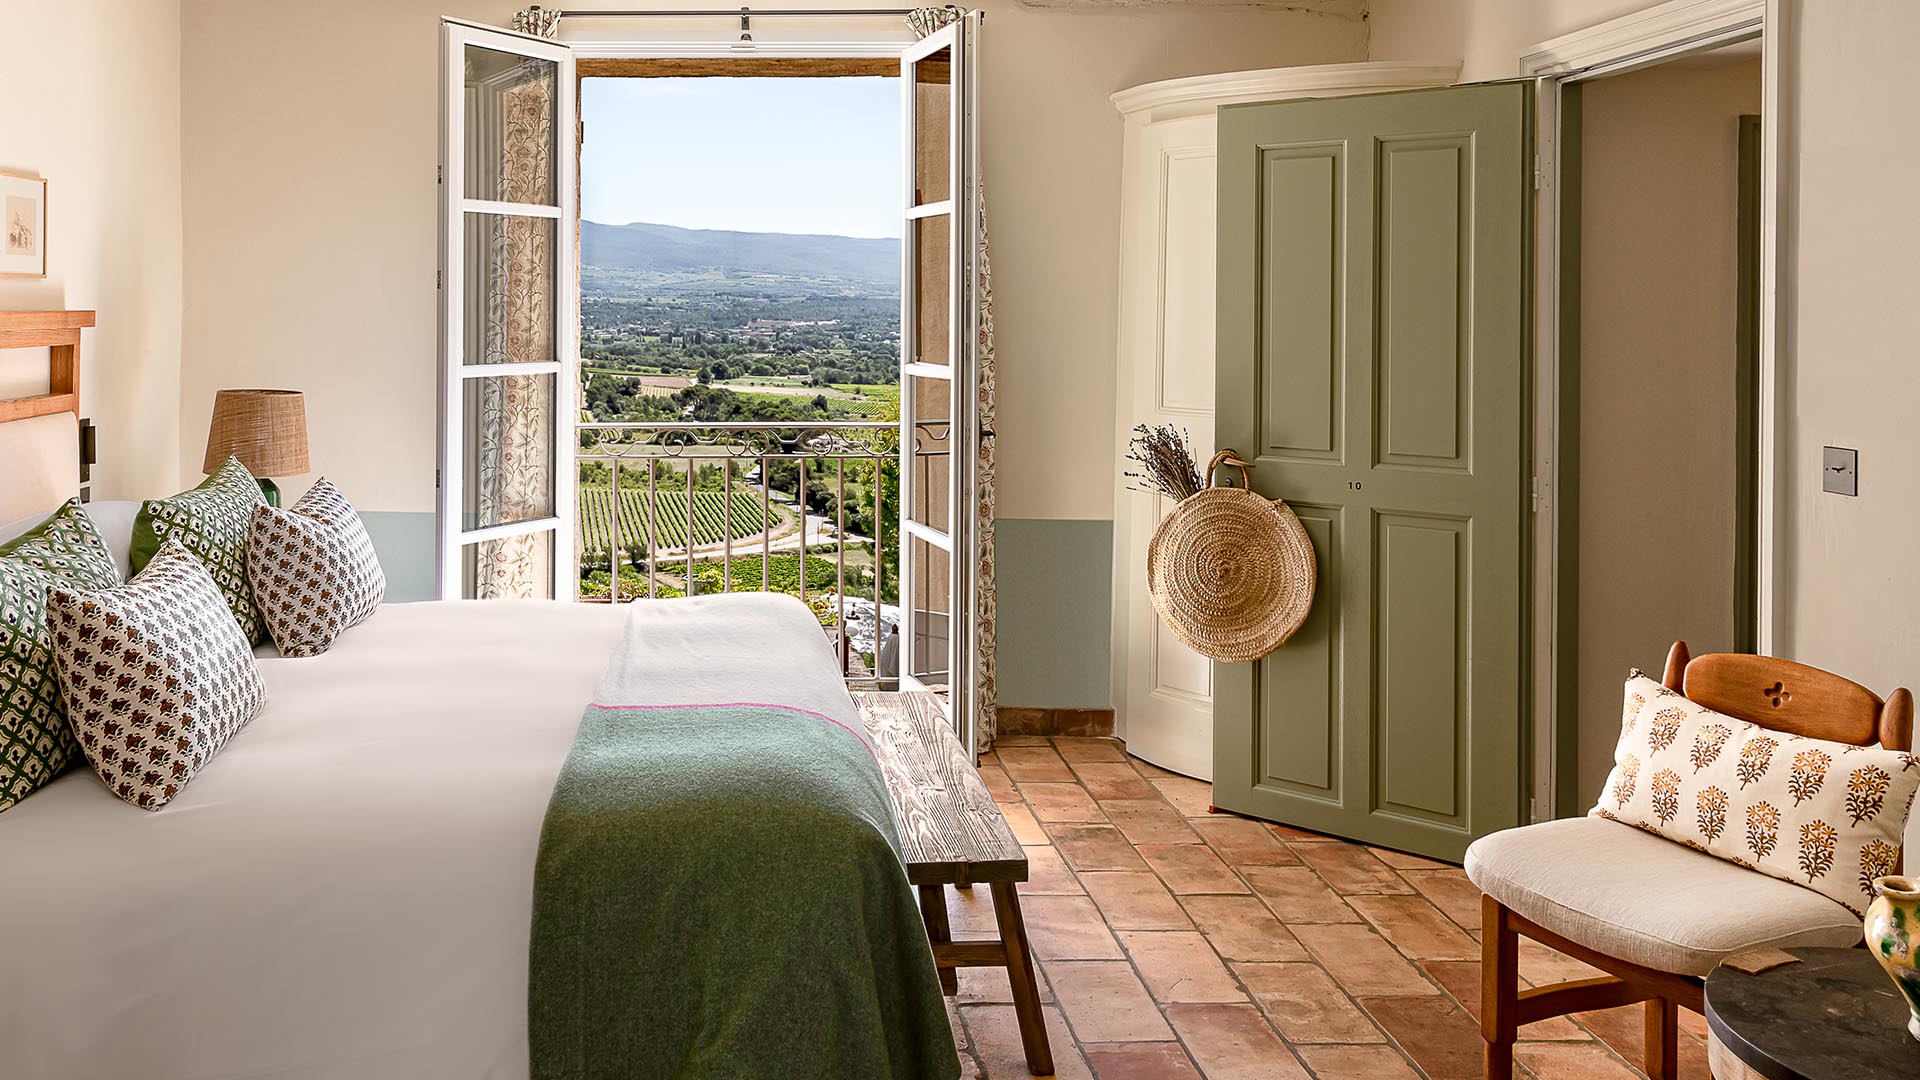 Rise and shine: 10 boutique hotel bedrooms with beautiful views